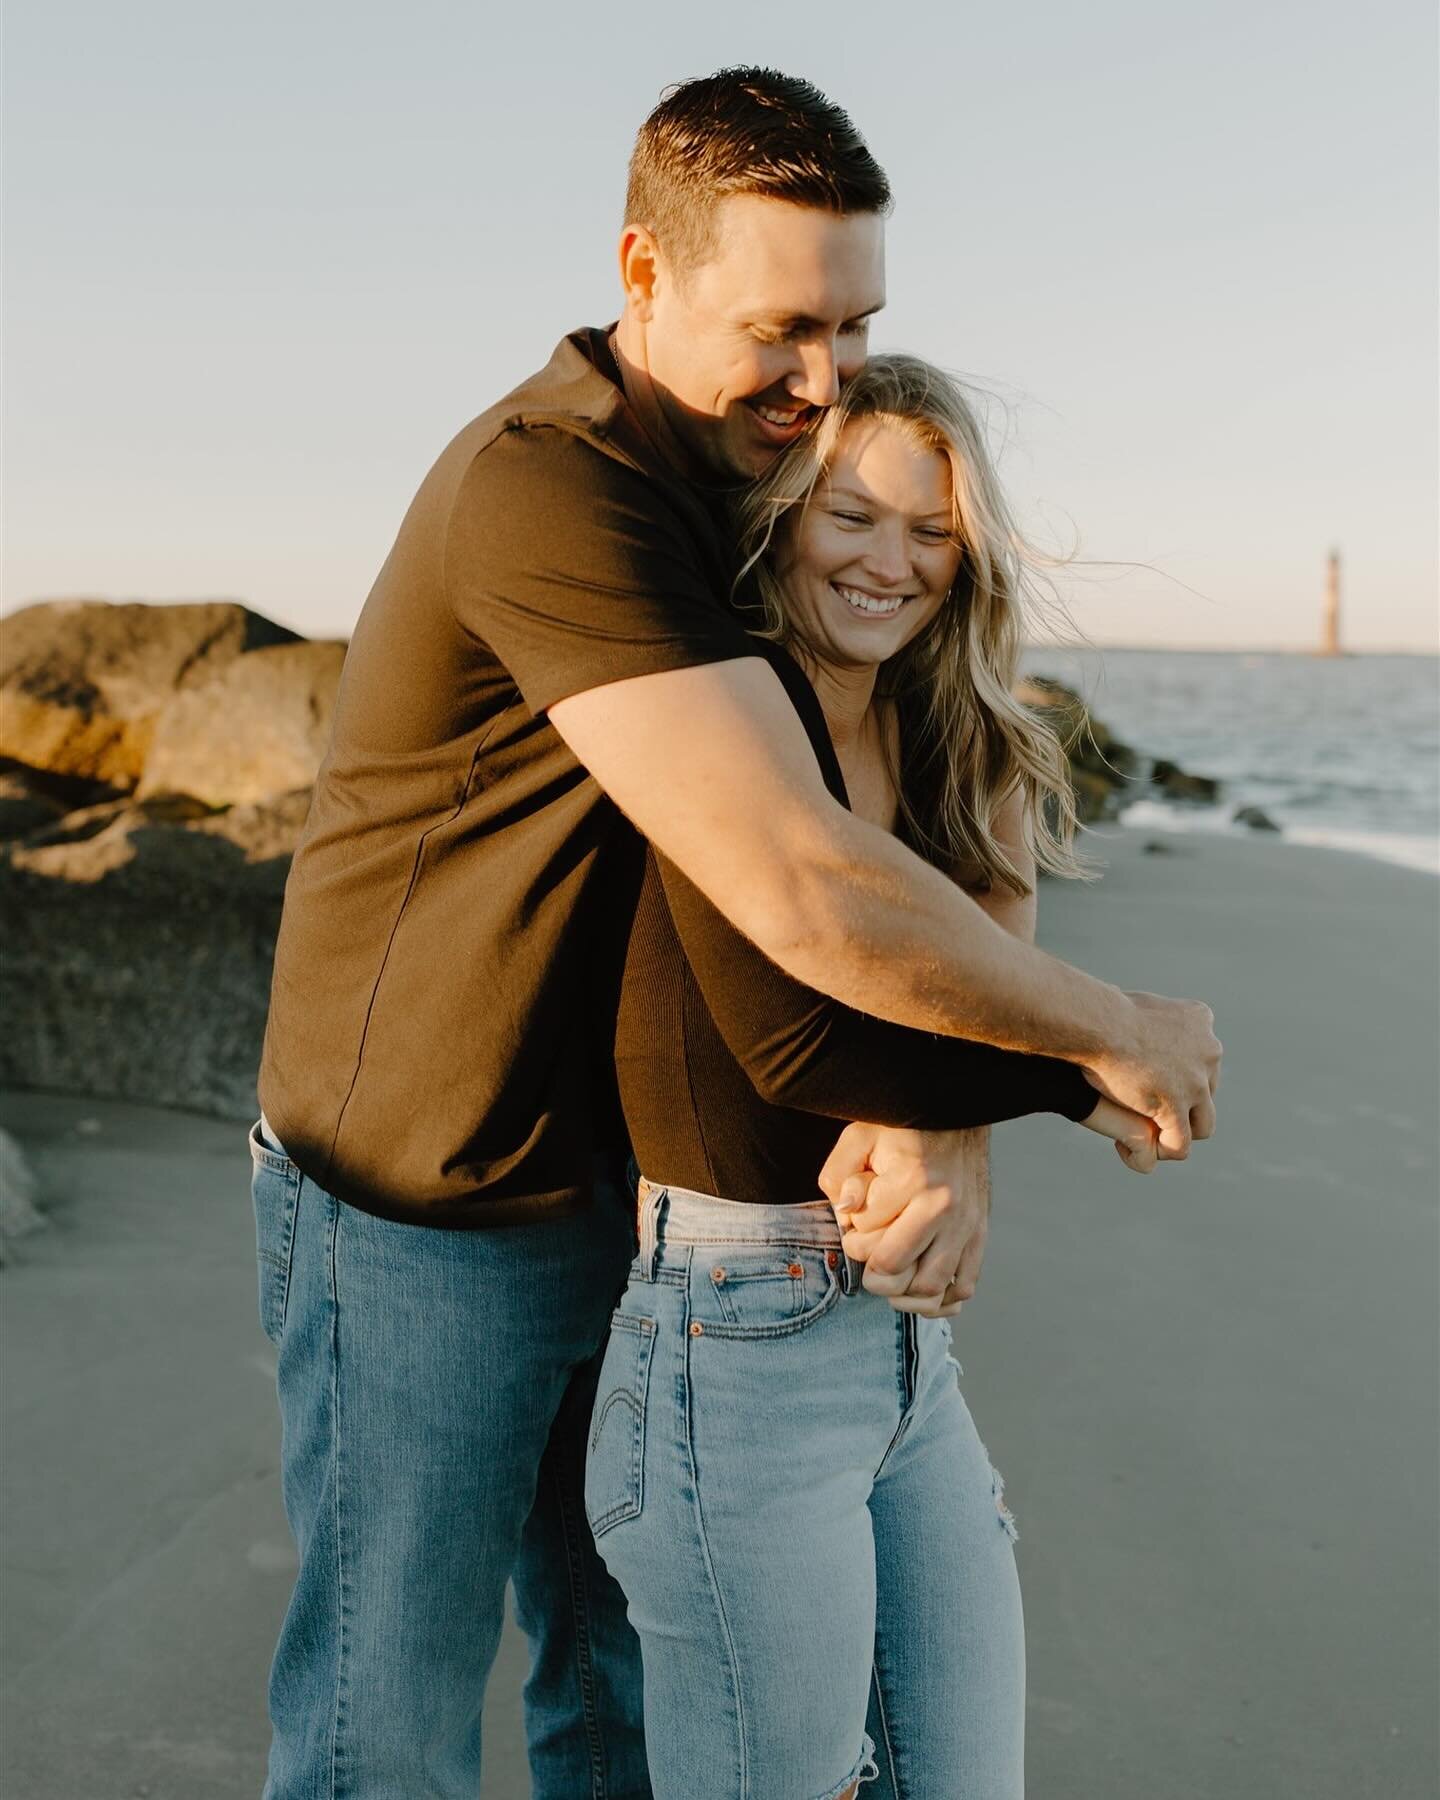 Tomorrow they get married! I Had to share from their fun January beach engagement session. Sarah &amp; Wilson let&rsquo;s get y&rsquo;all married!!